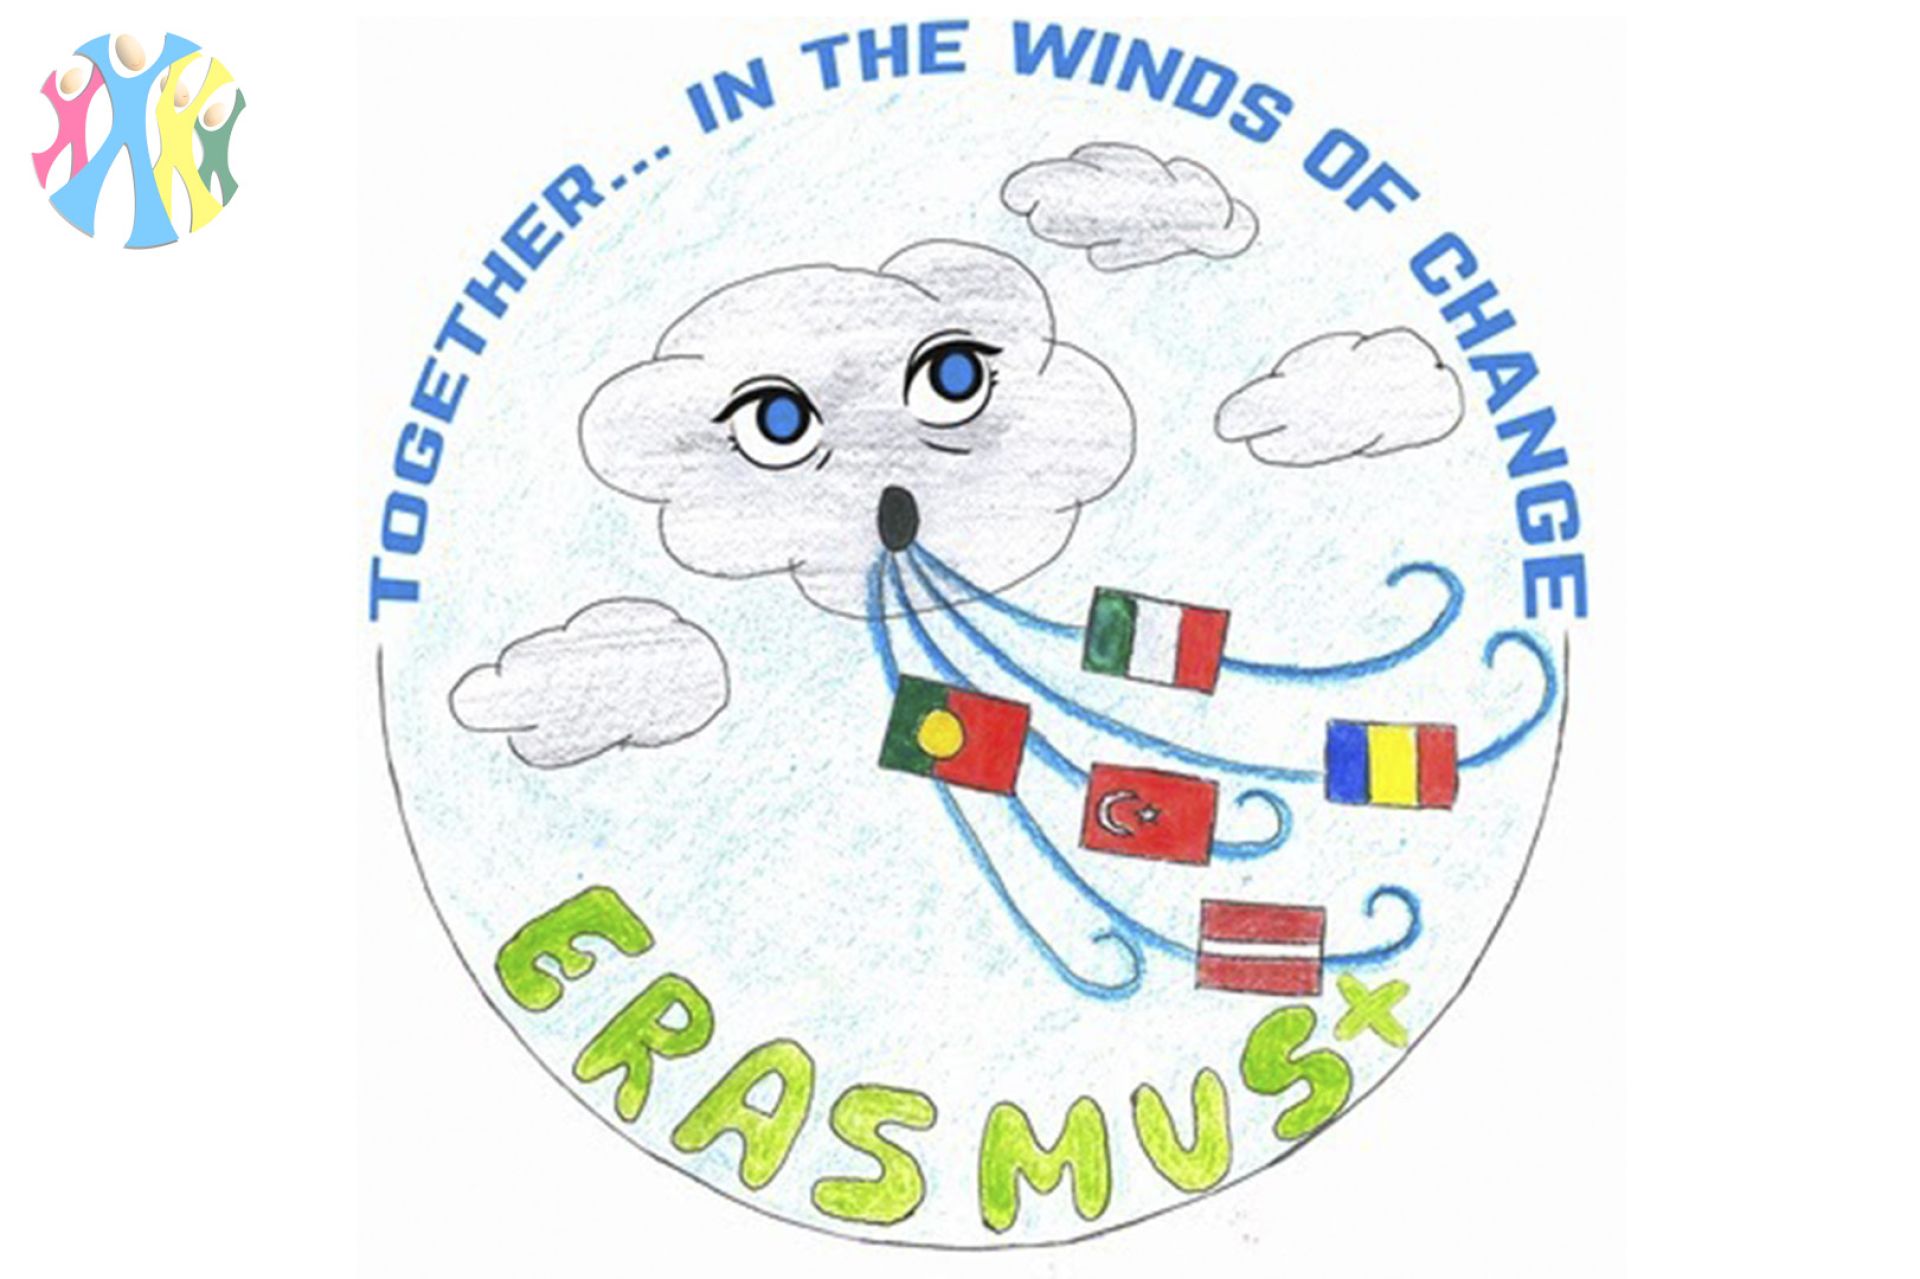 Projeto Erasmus "Together... in the Winds of Change"